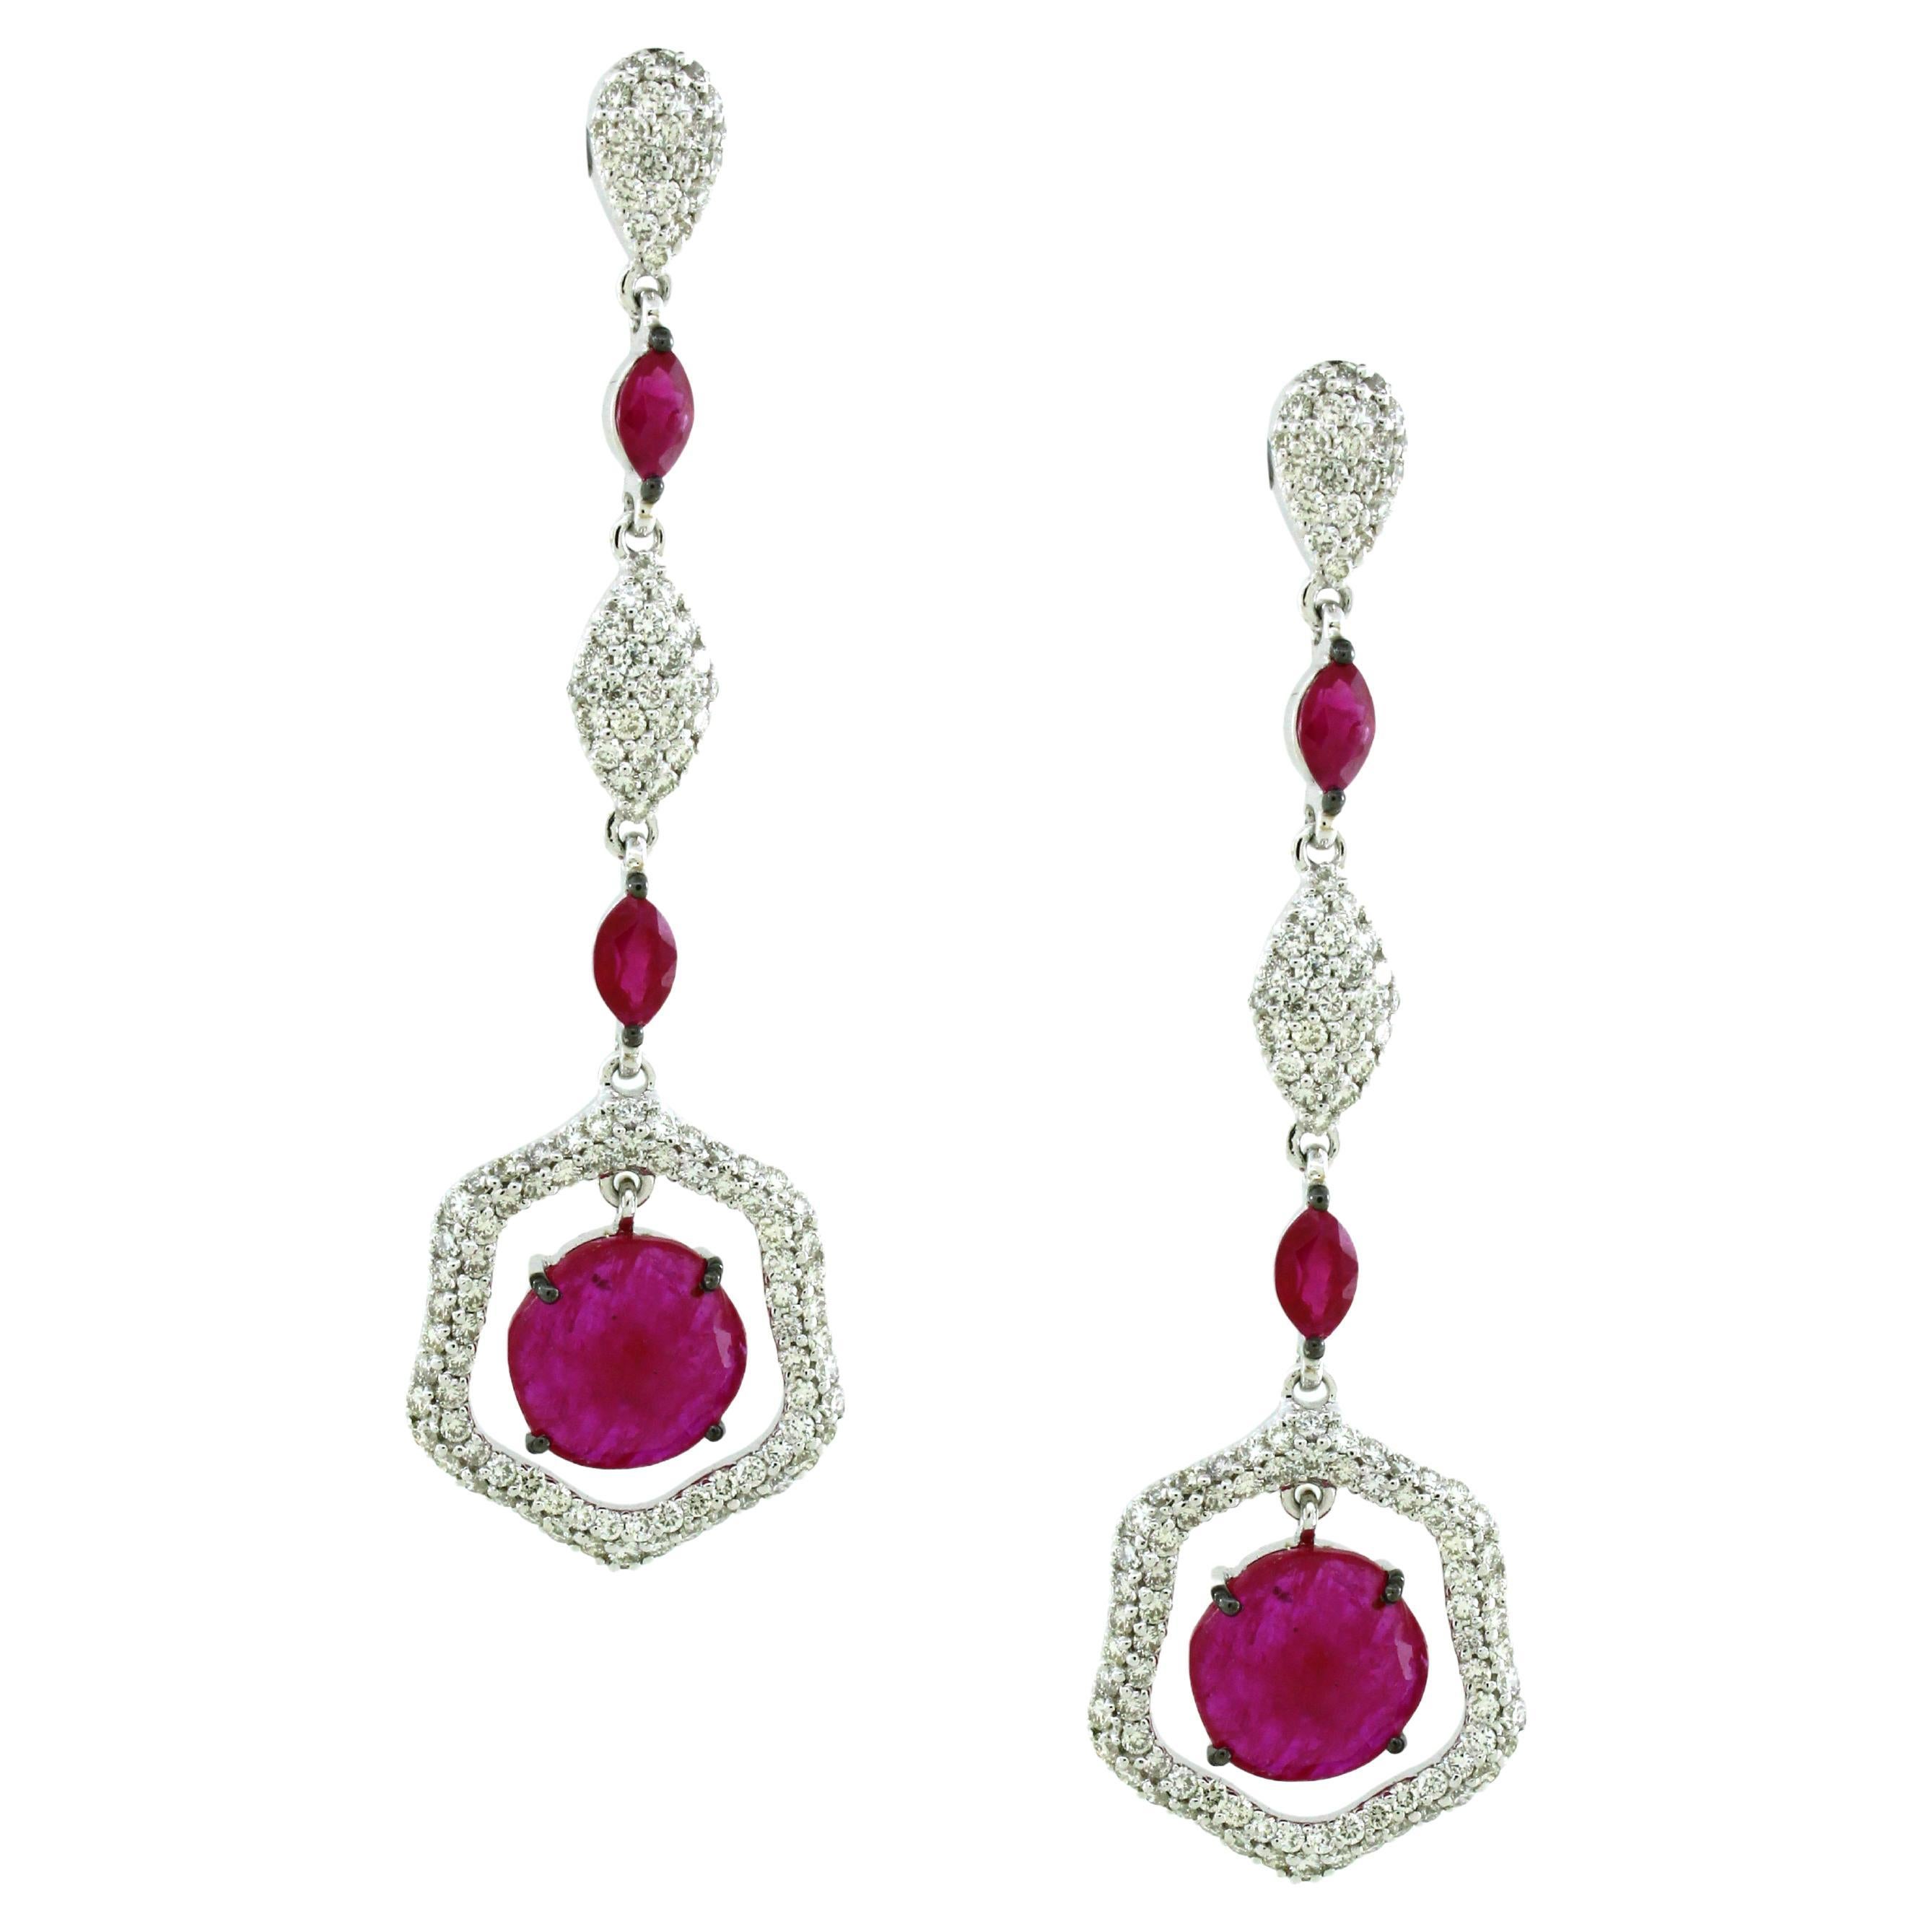 5.95 carats of Ruby Drop Earrings For Sale